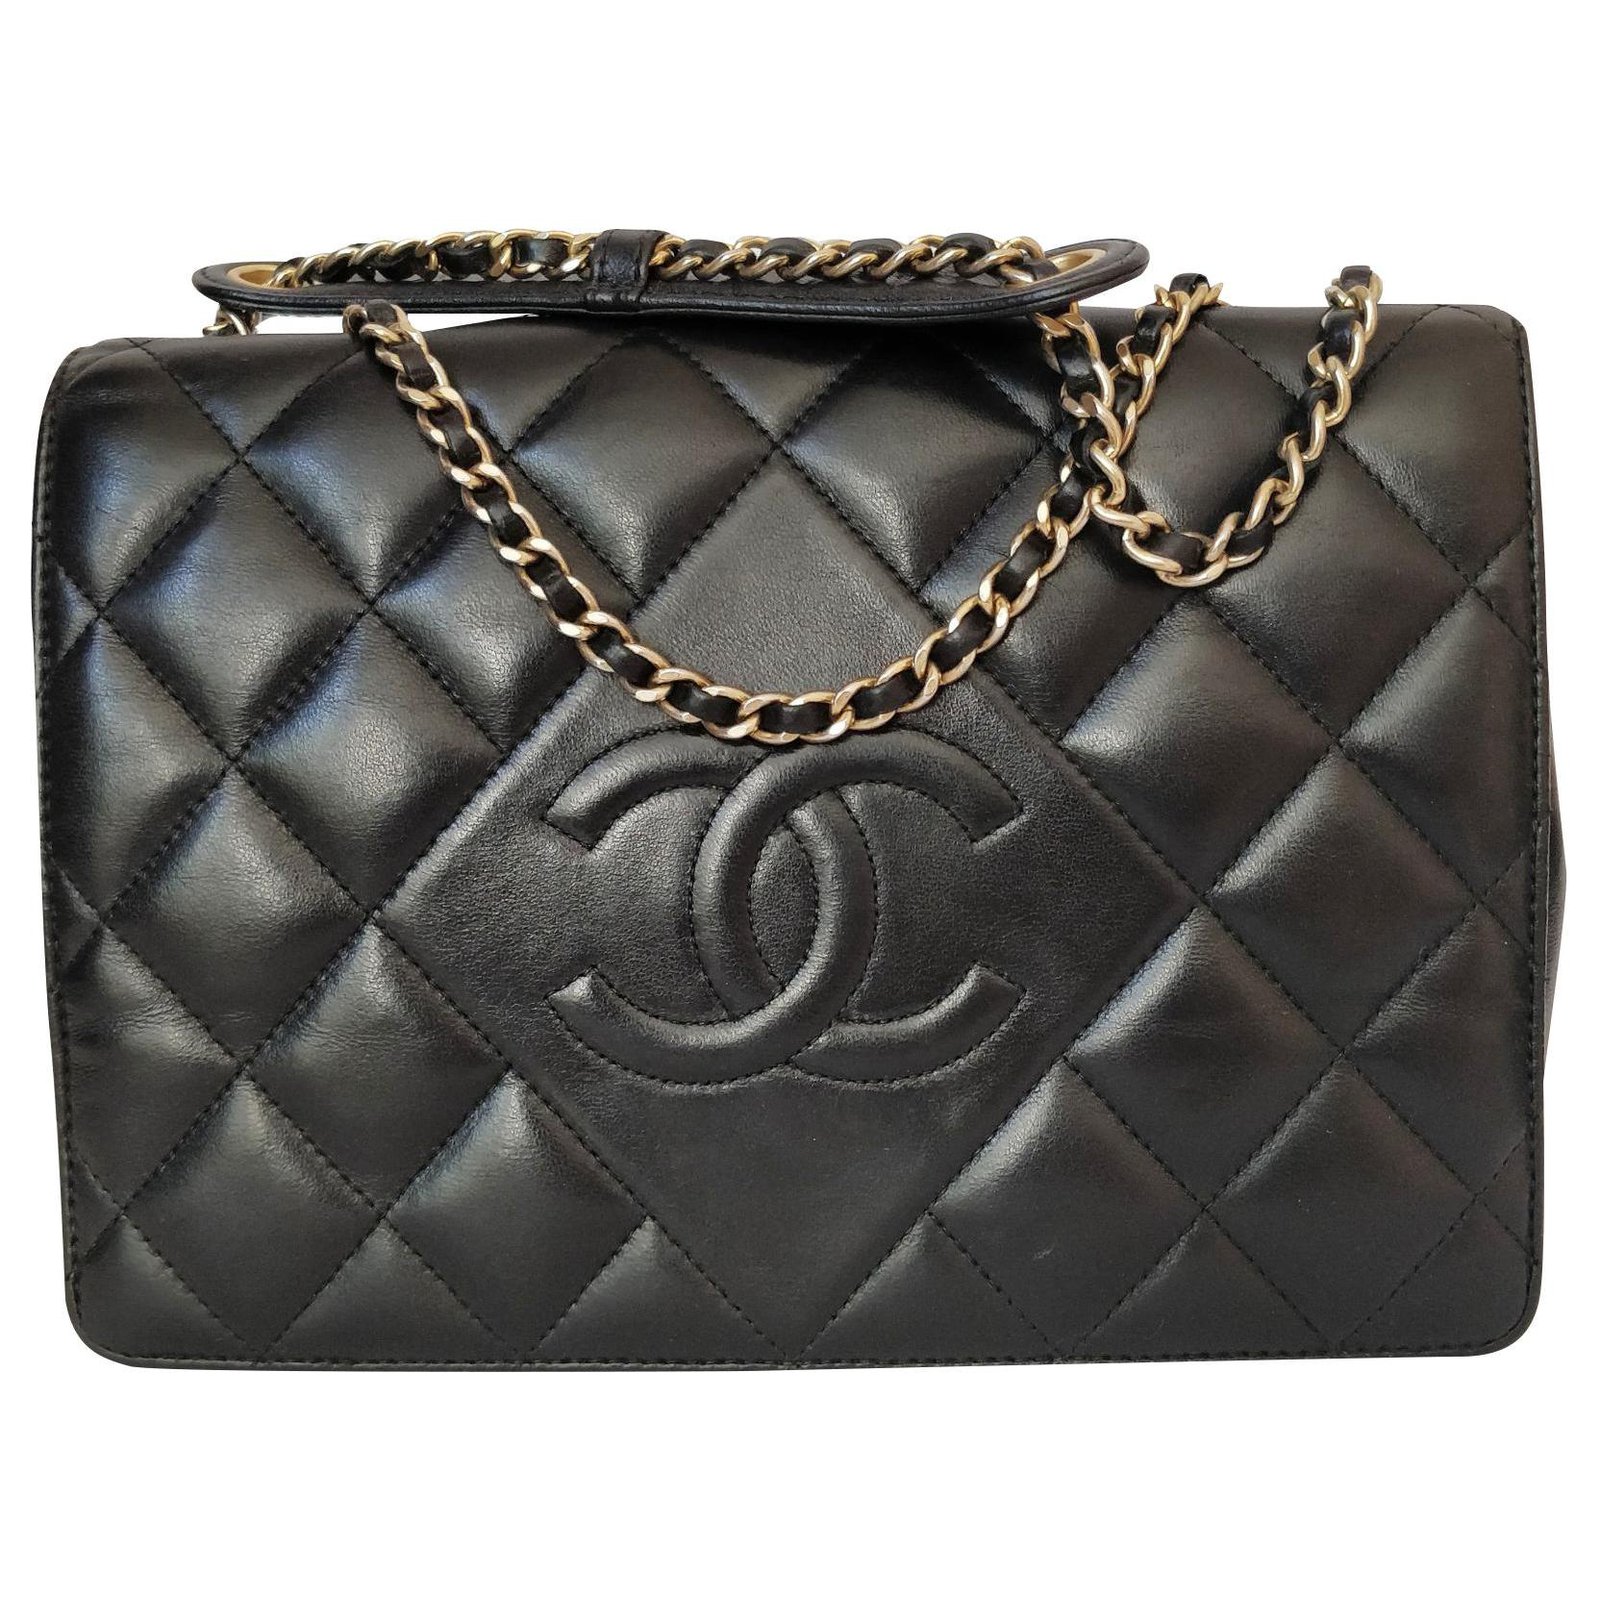 Chanel  Black Quilted Leather Crossbody Uniform Bag  VSP Consignment